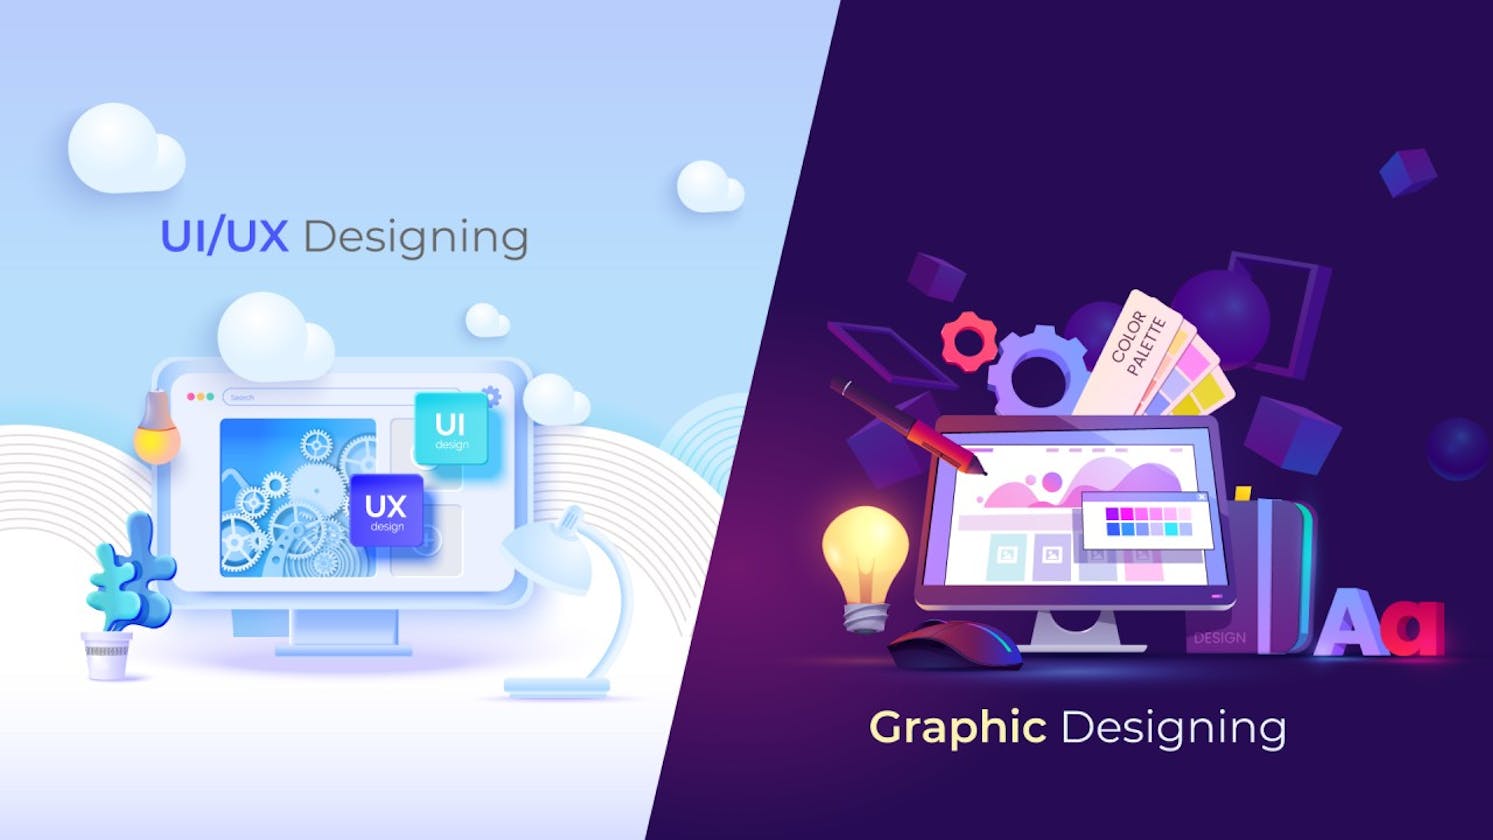 Crafting Digital Experiences The Art and Science of UI/UX Design